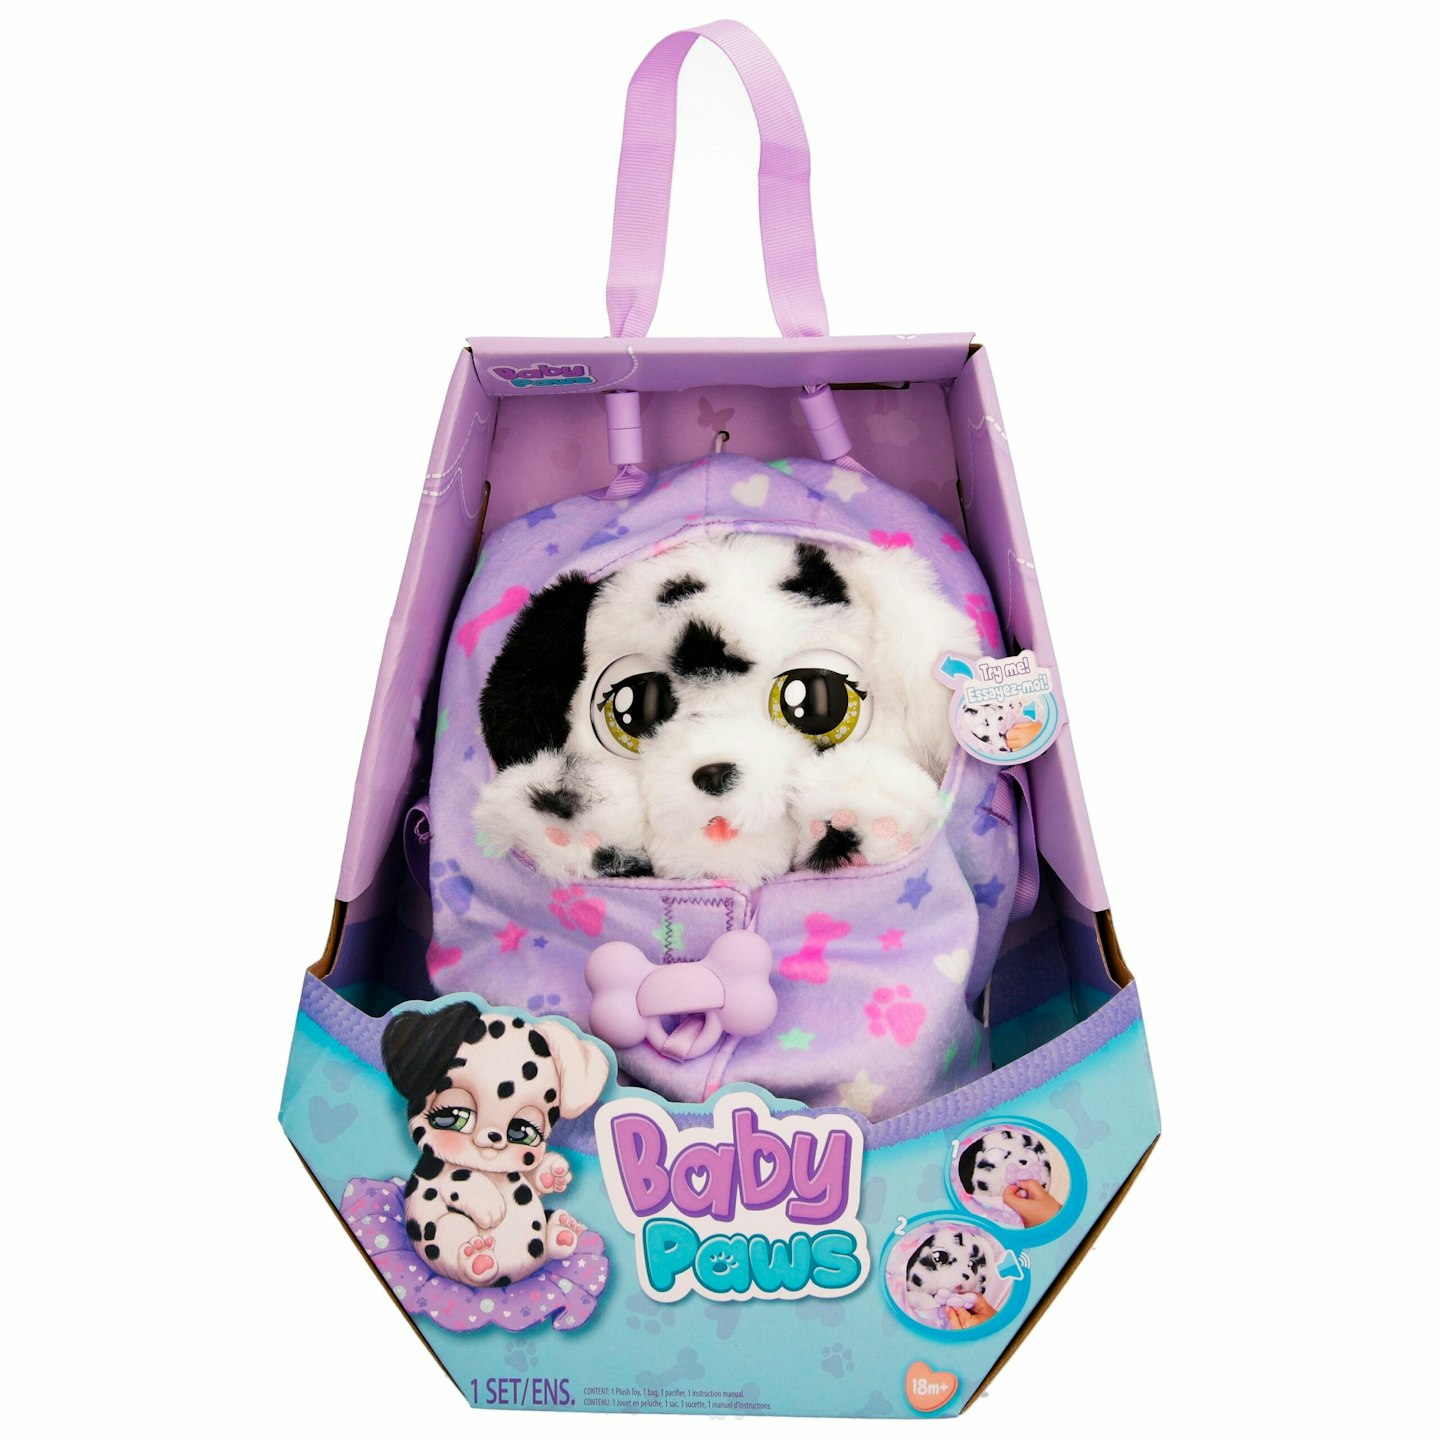  Best Christmas presents for toddlers Baby Paws Dalmatian